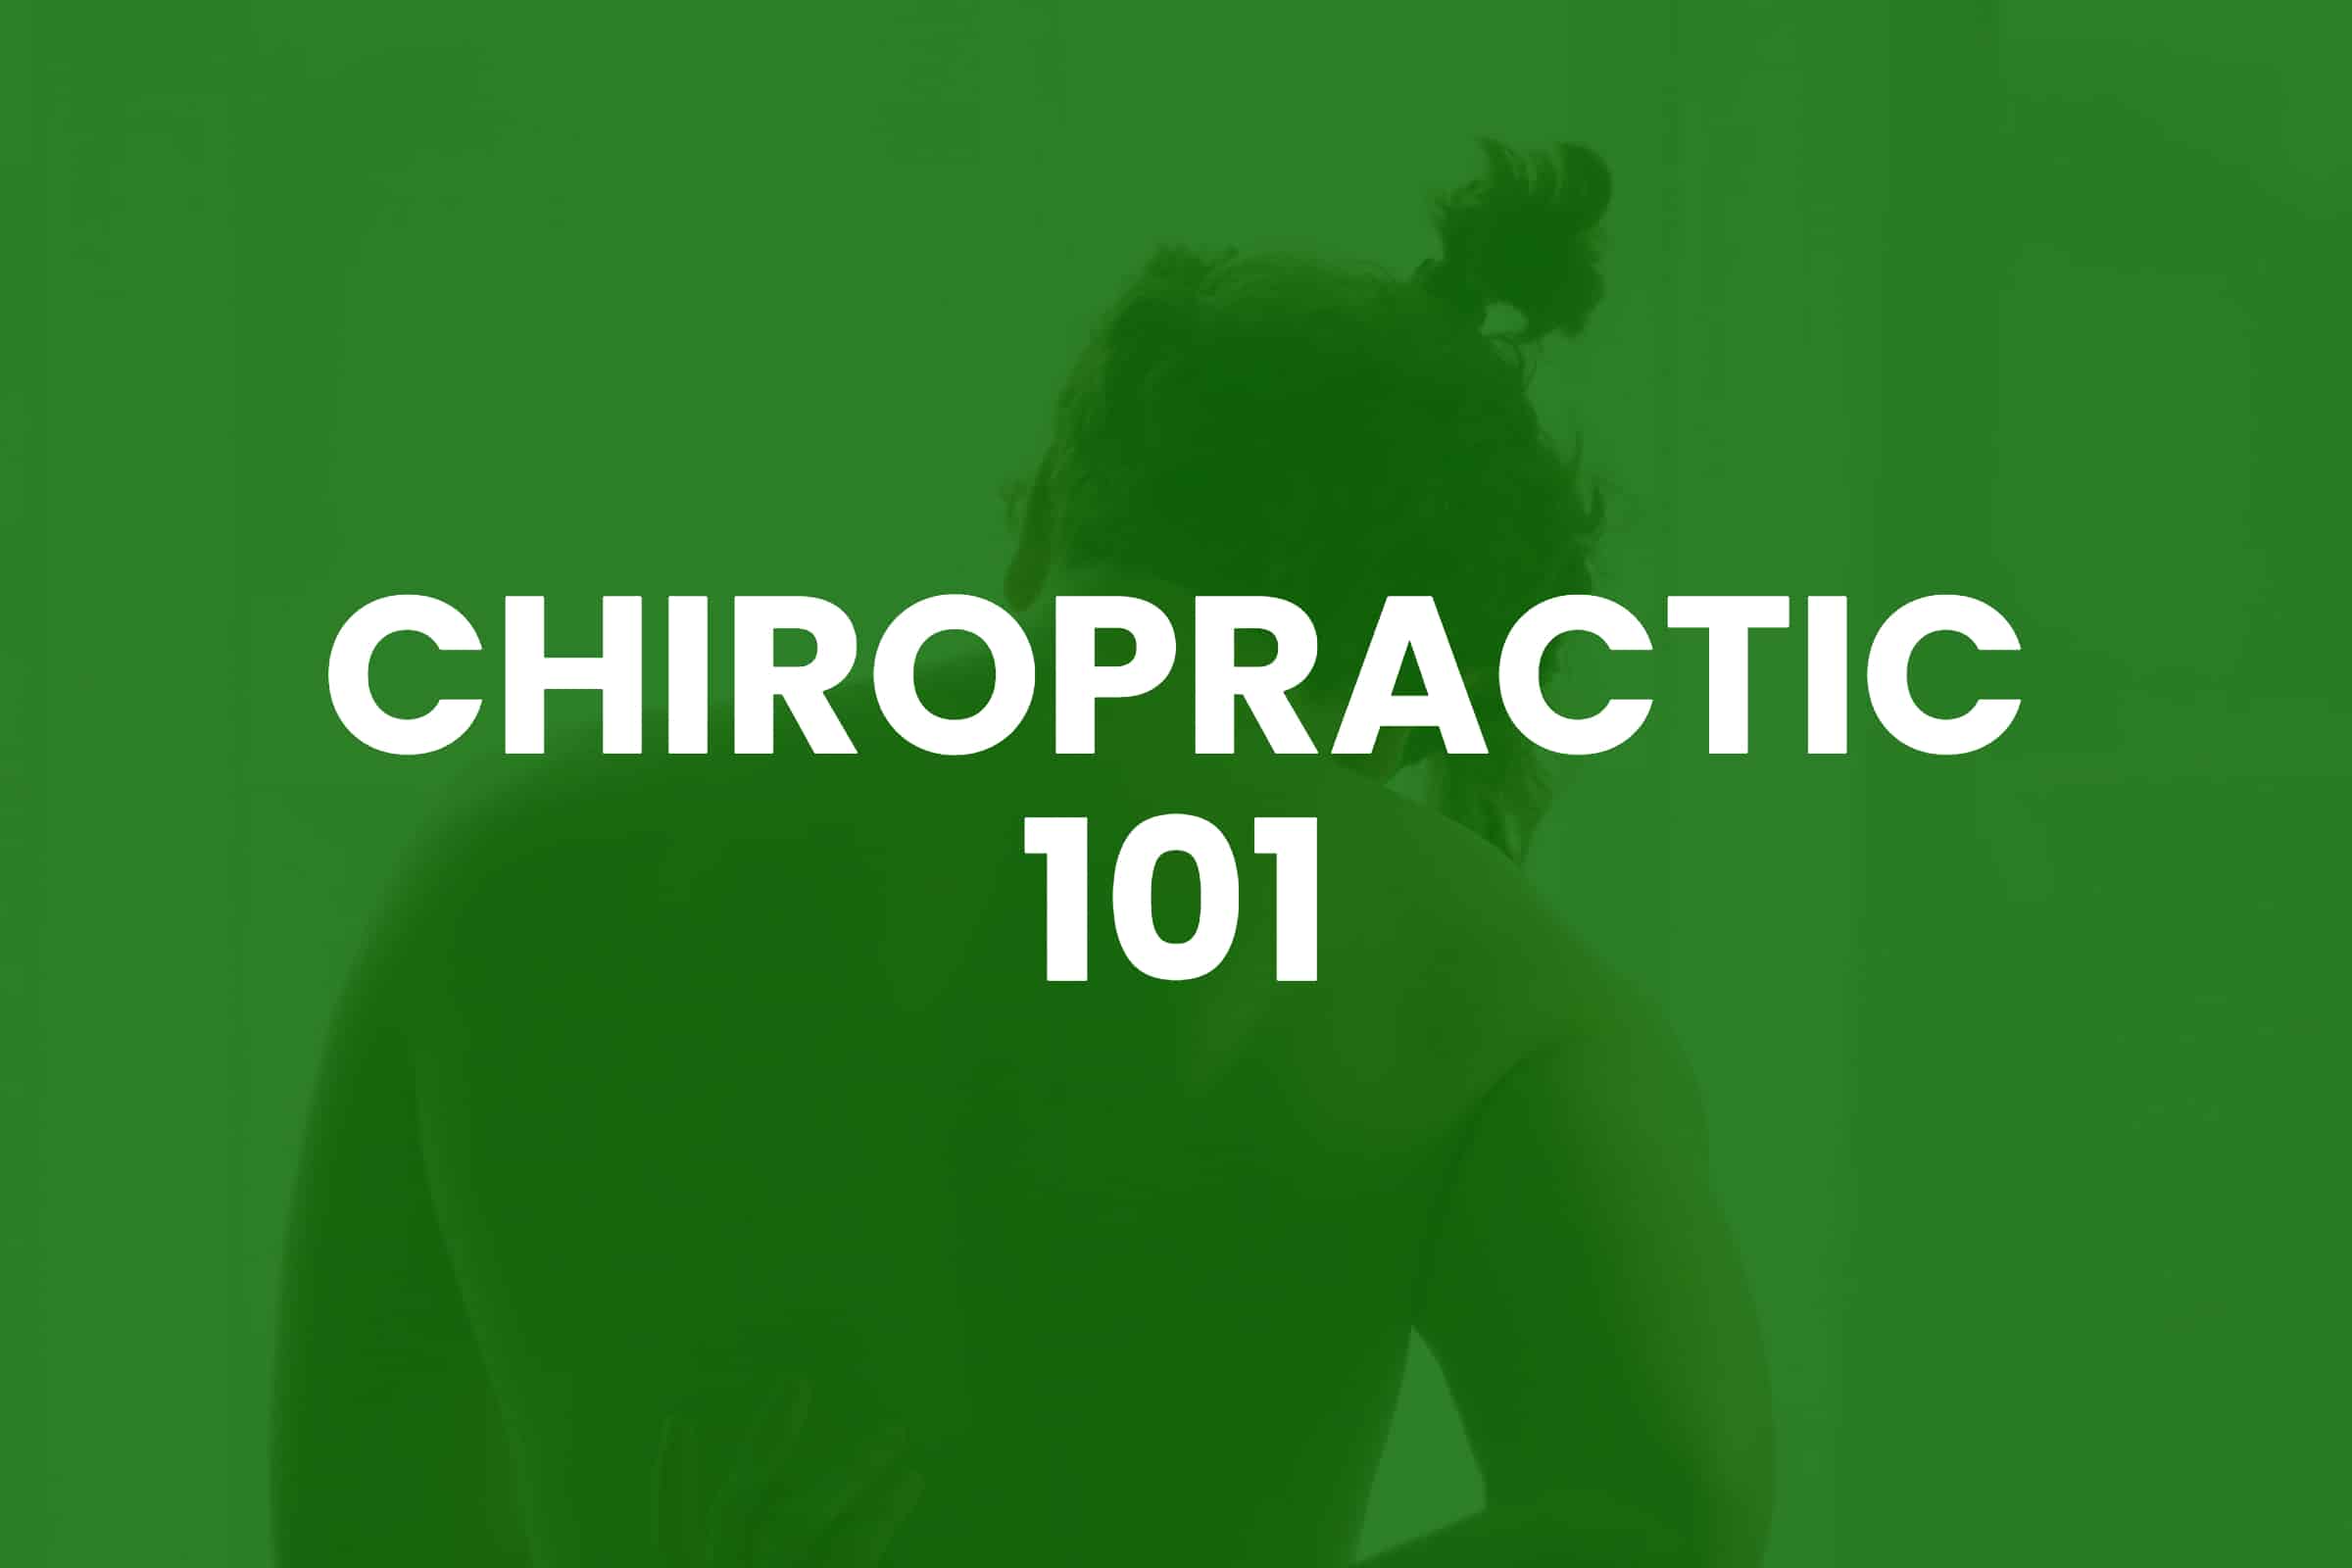 Is chiropractic good for your body? 1